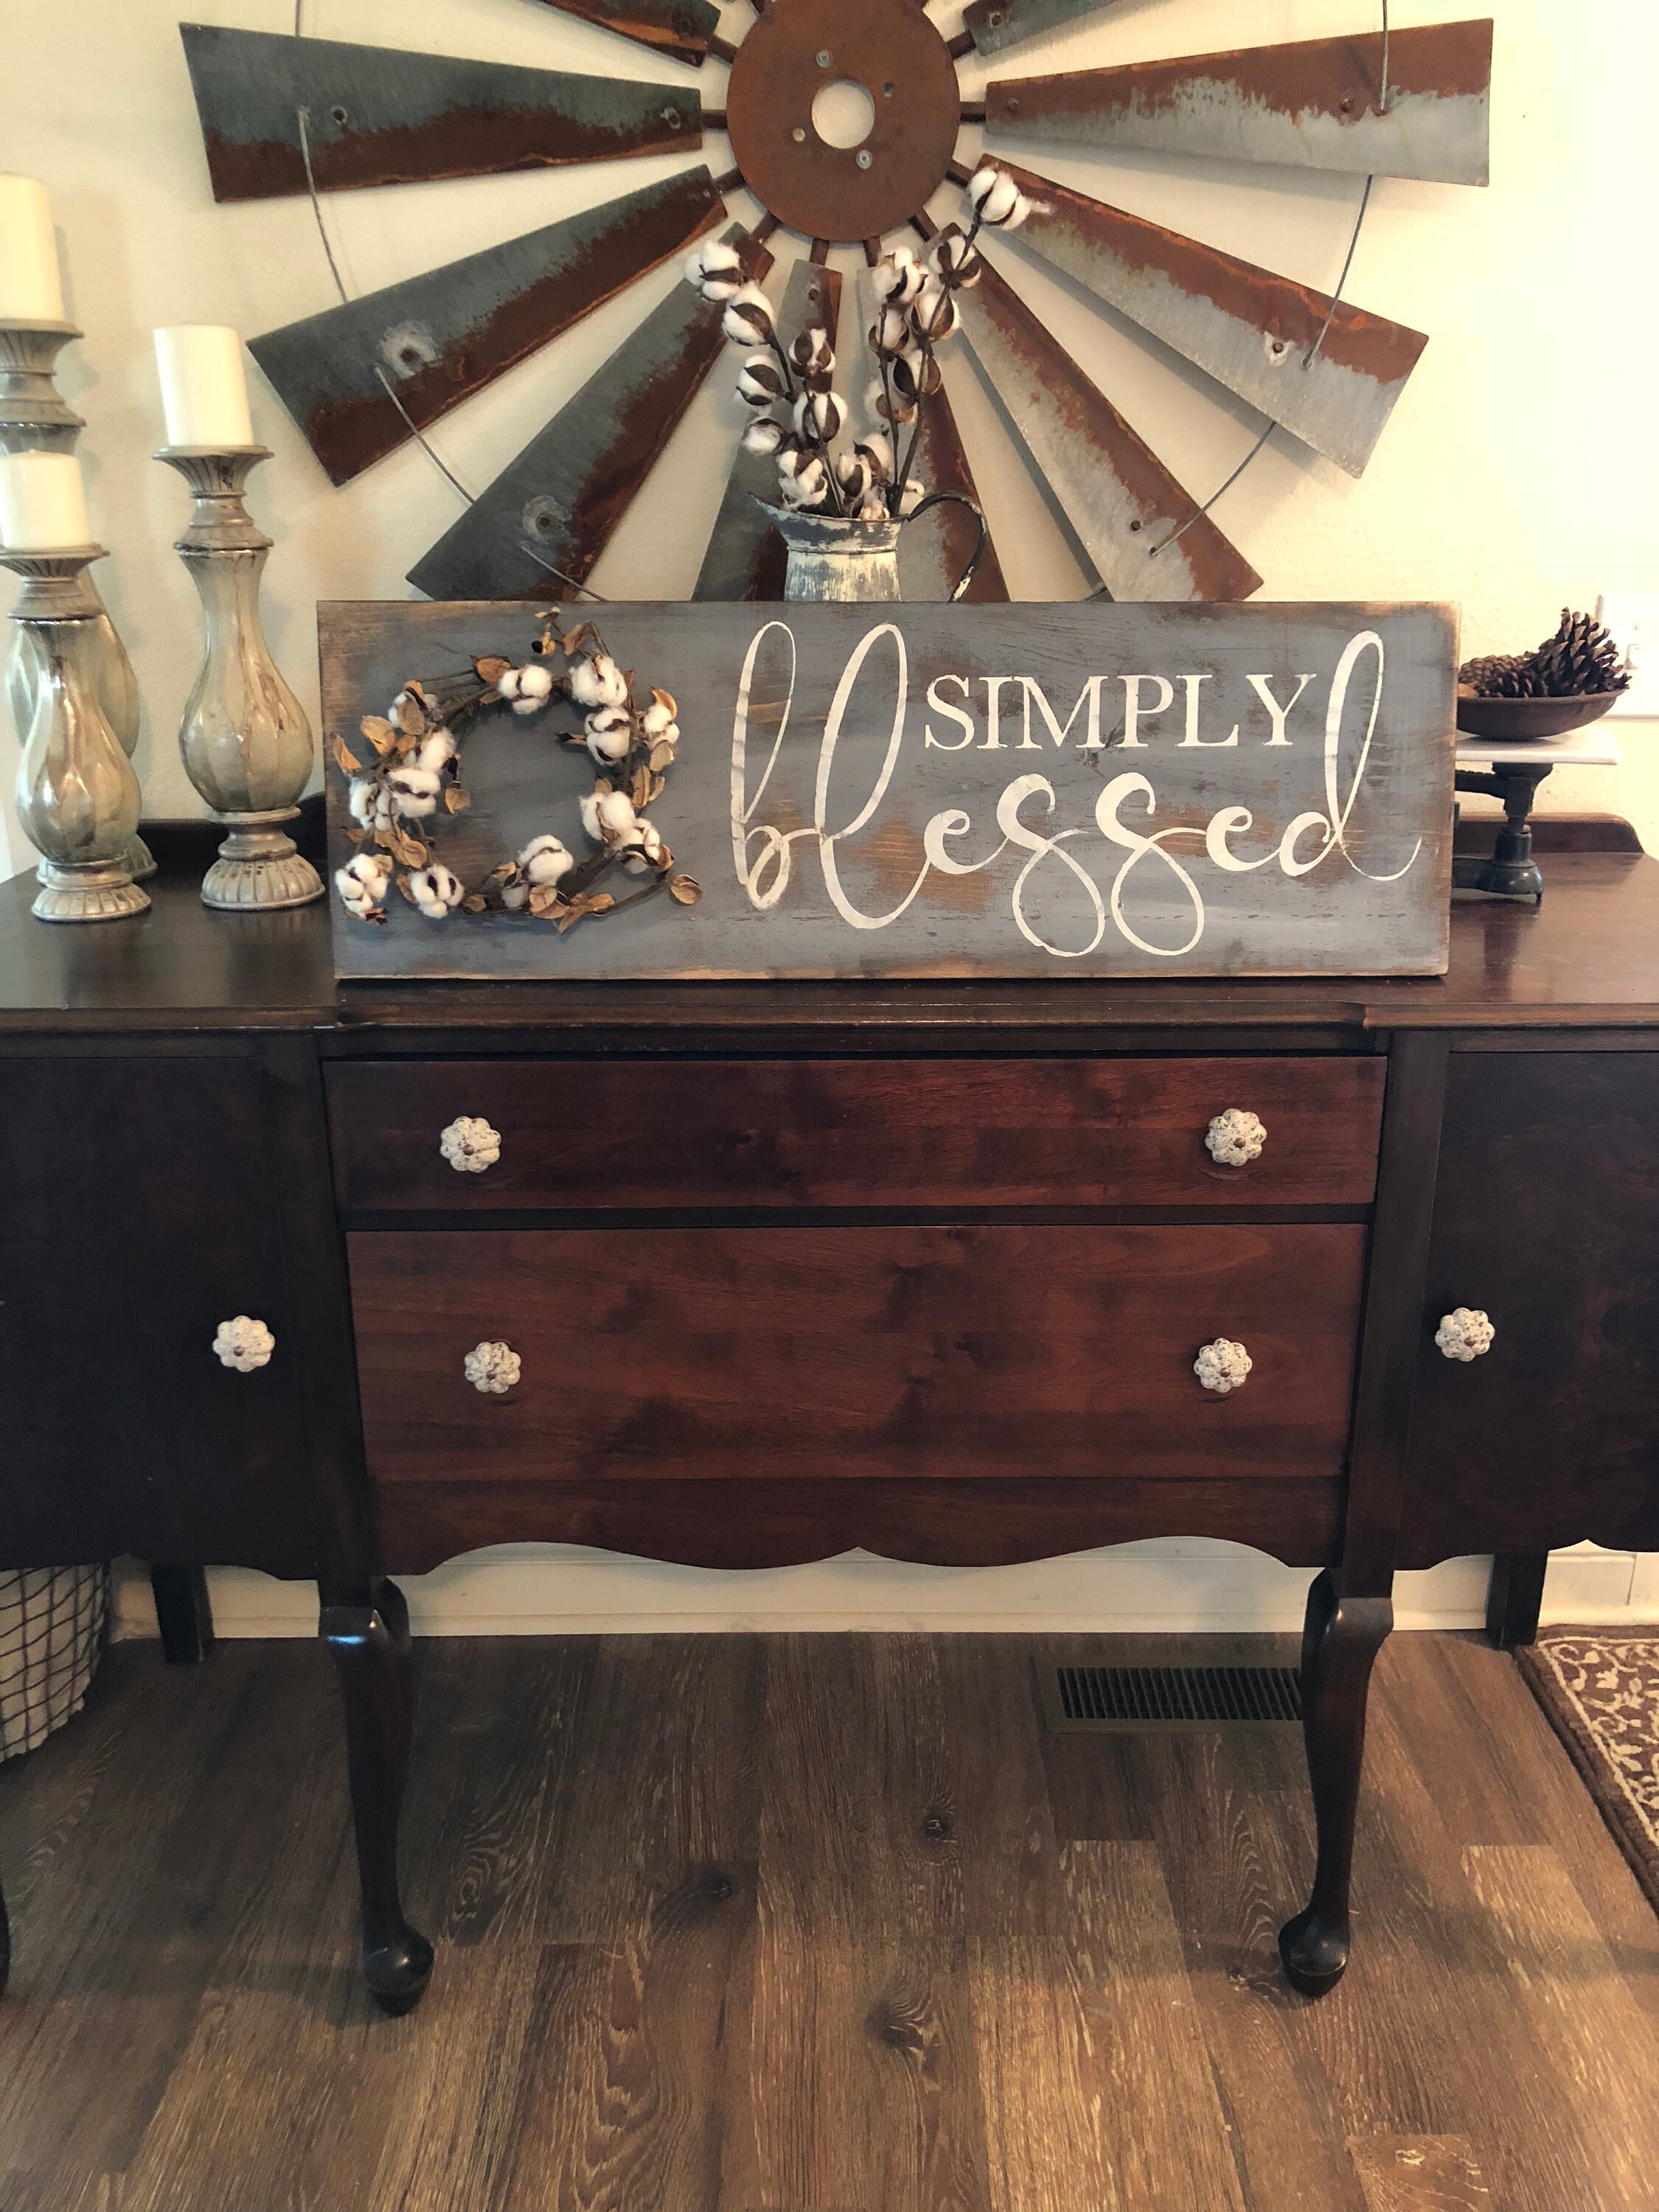 Simply blessed sign with cotton wreath / cotton decor / | Etsy